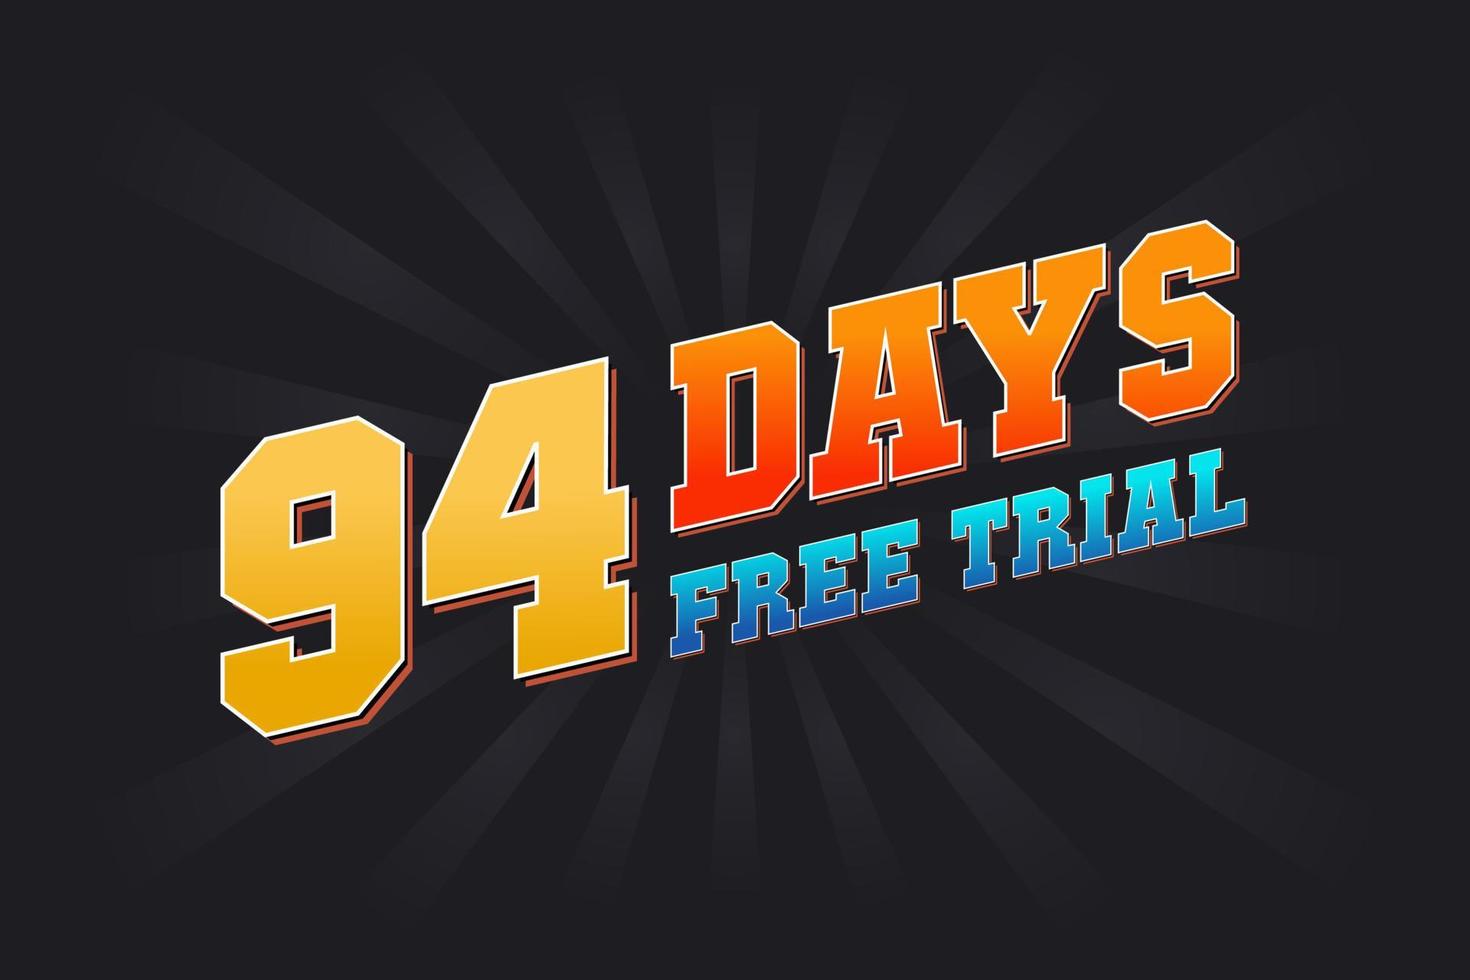 94 Days free Trial promotional bold text stock vector